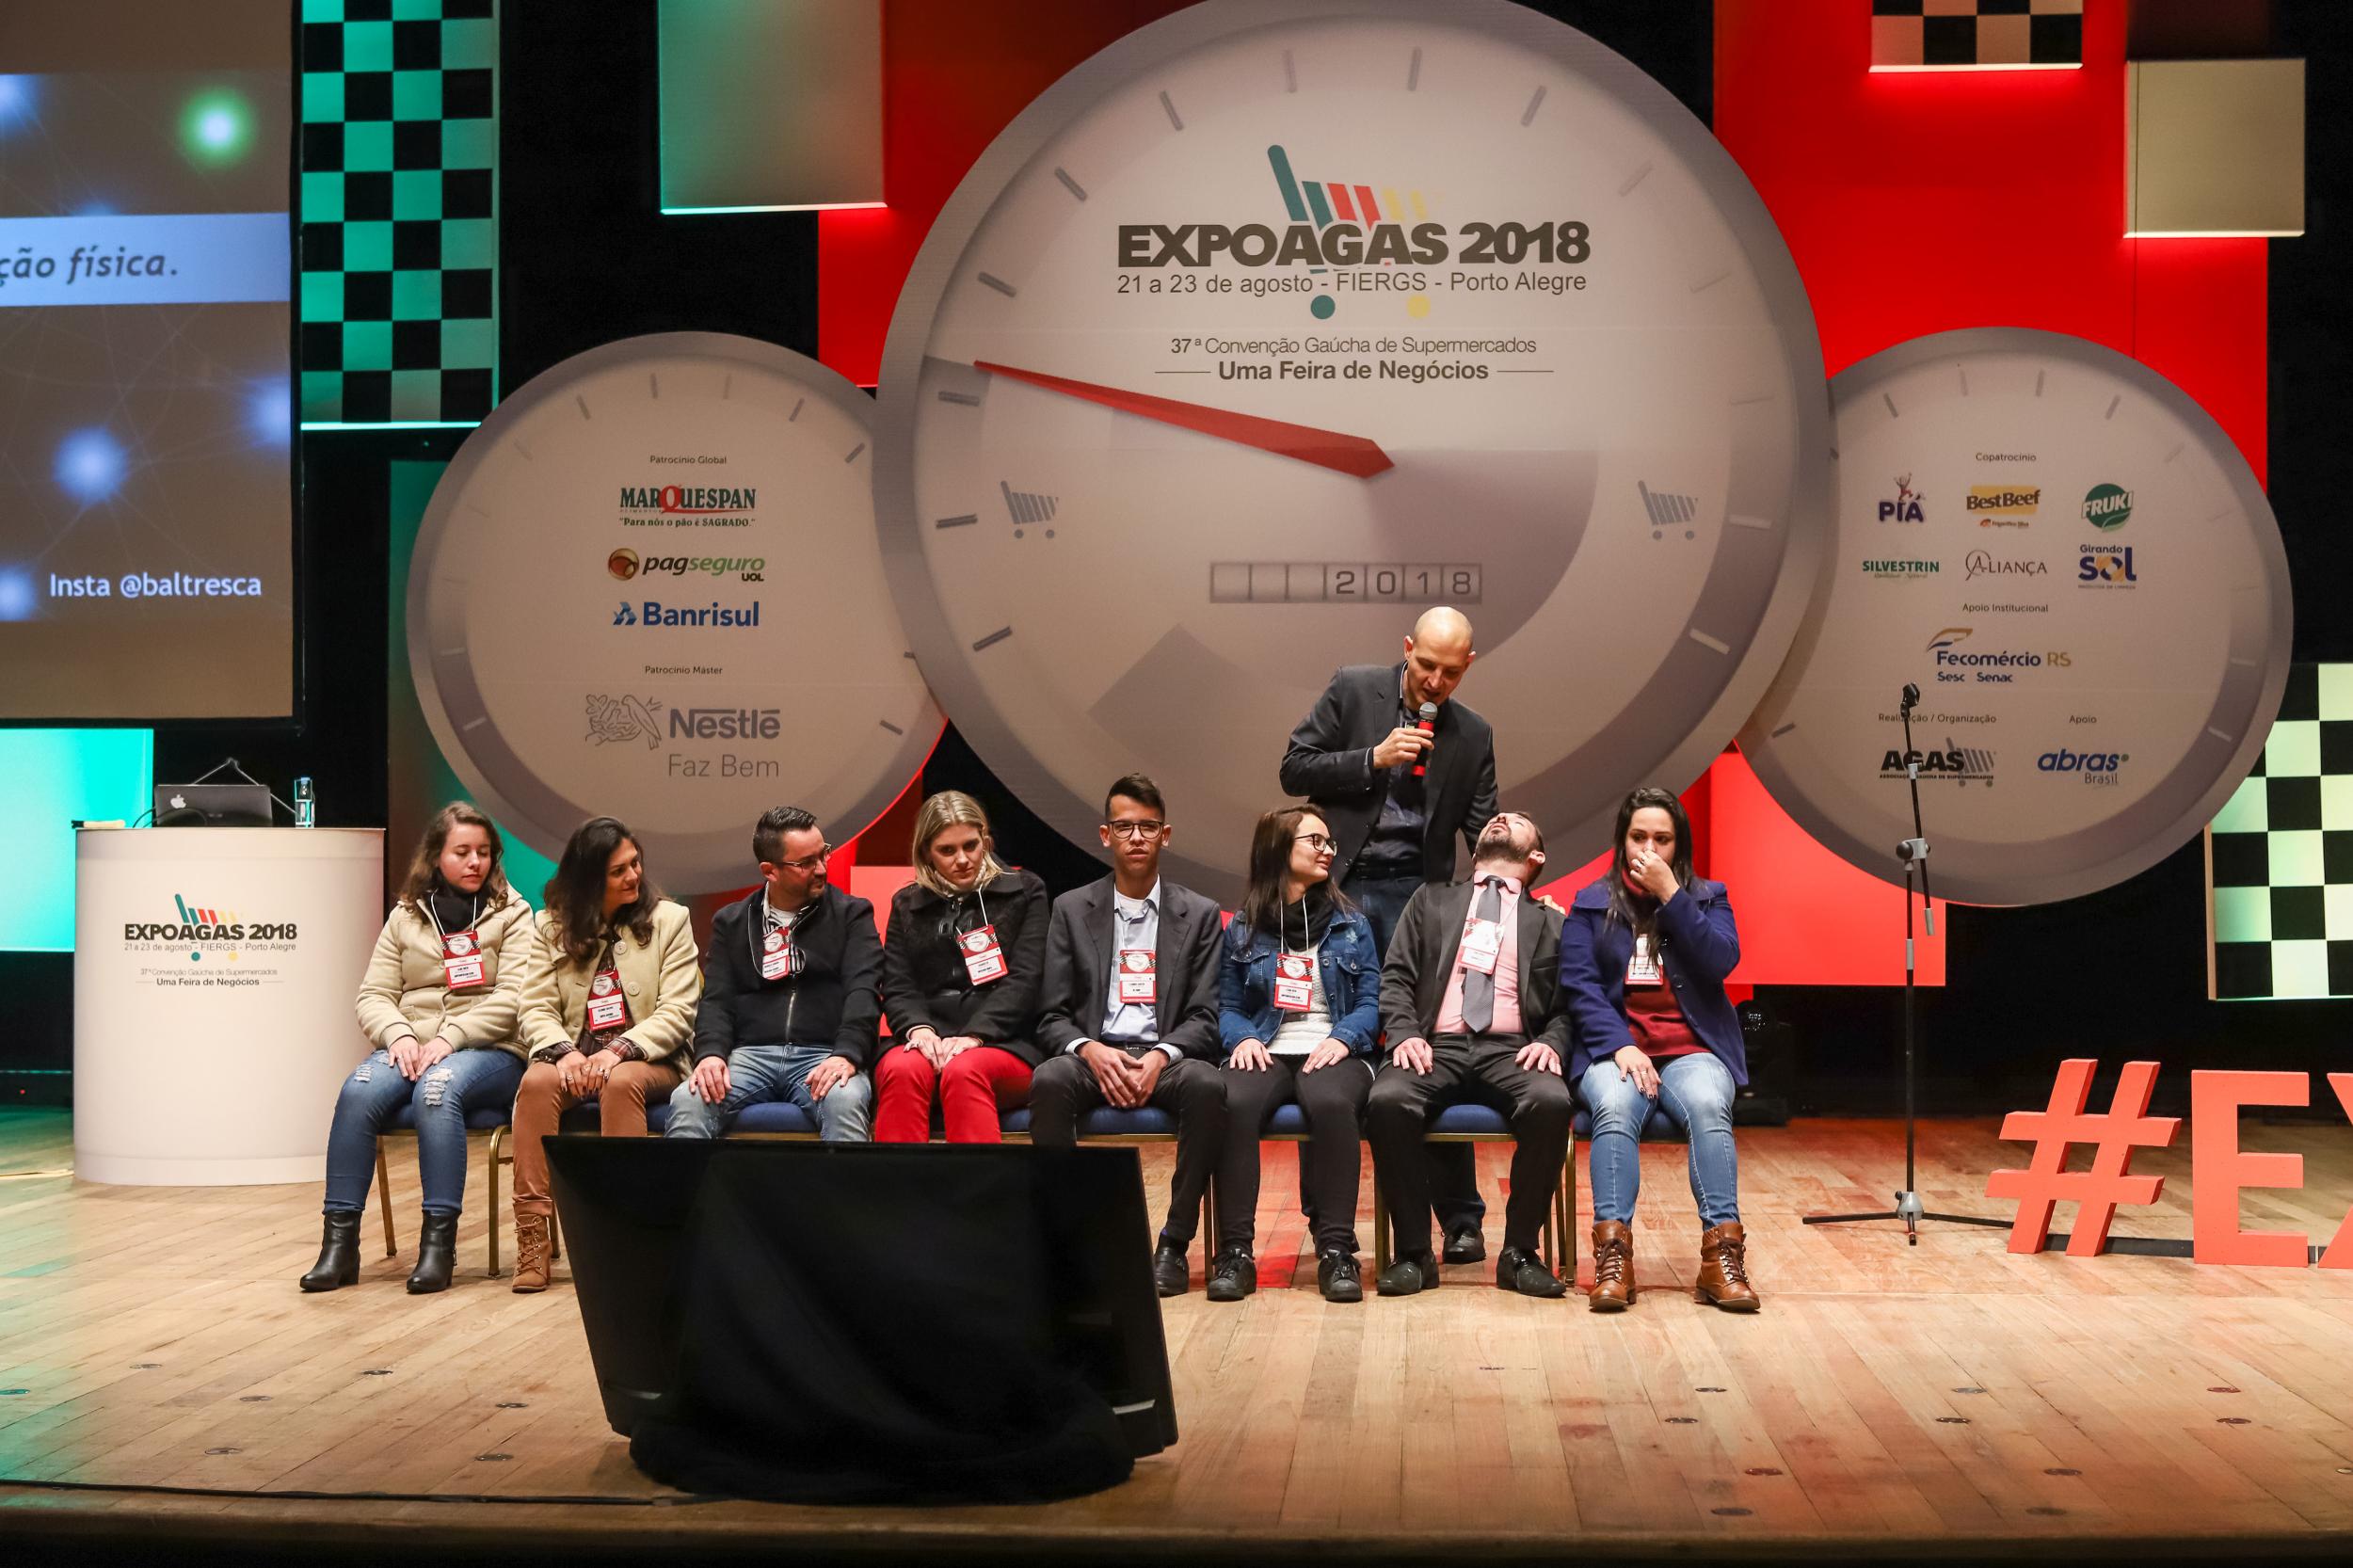 AGAS - EXPOGAS 2018 (29)